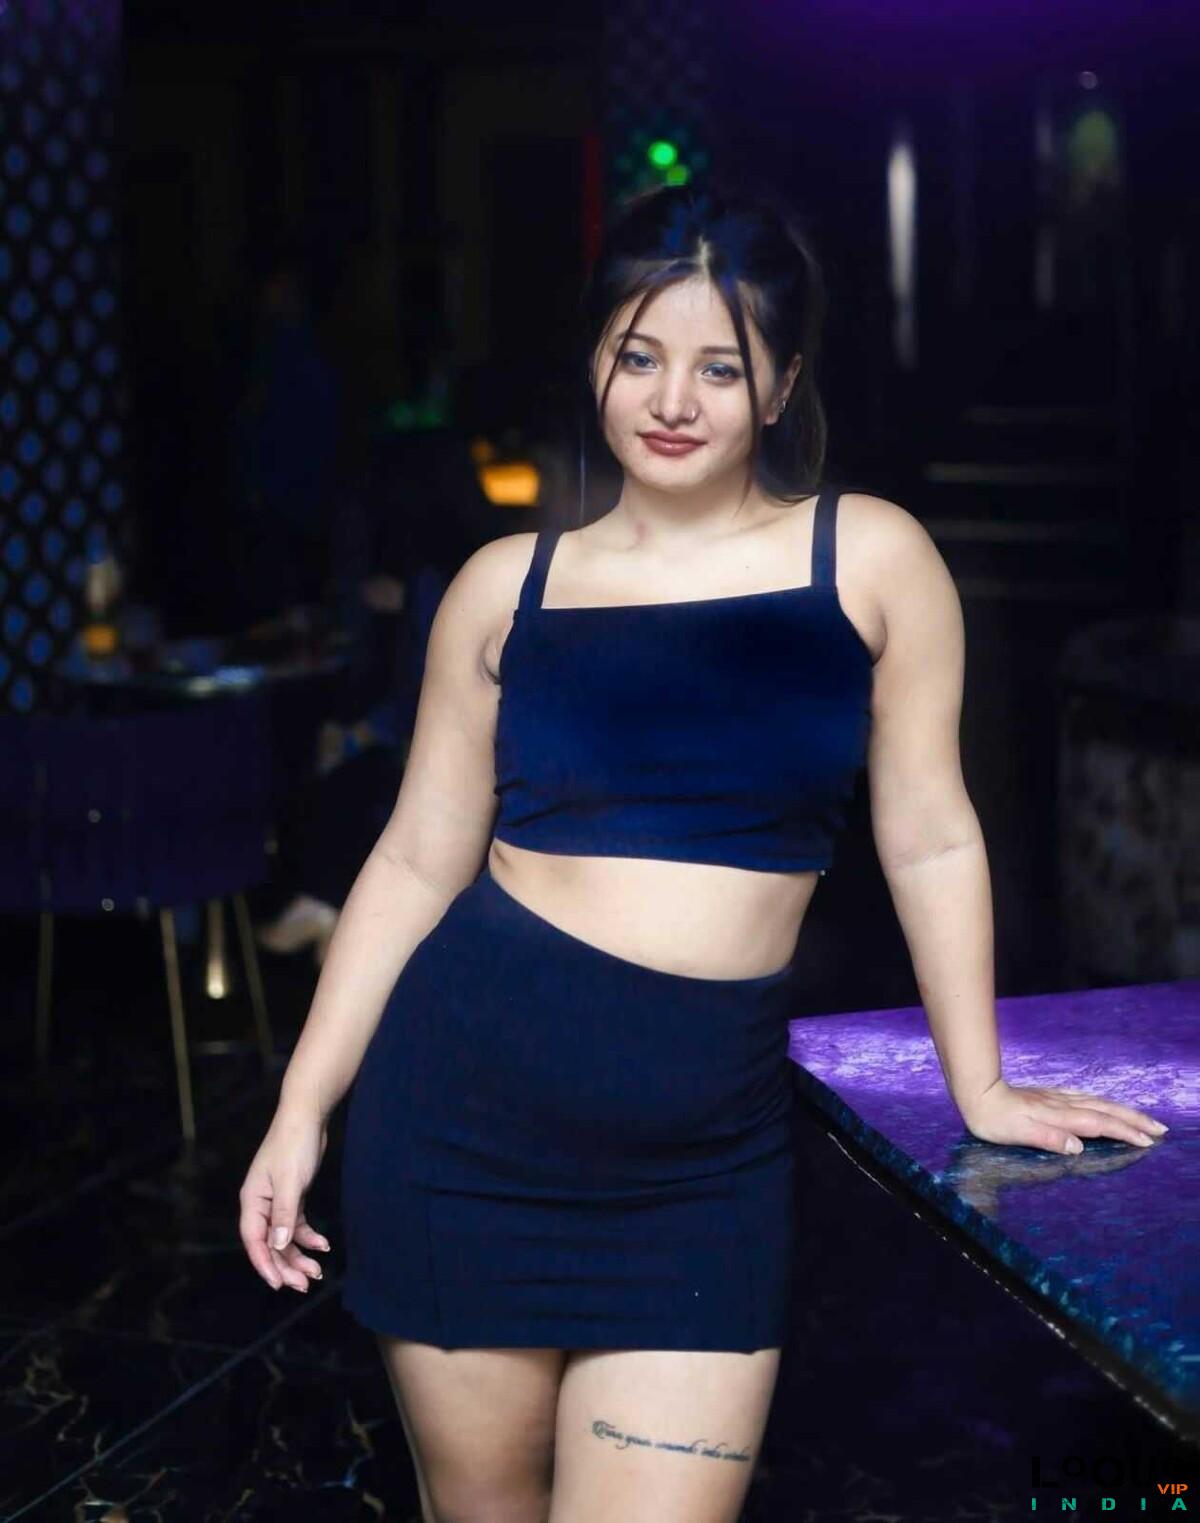 Call Girls Delhi: Genuine Call Girls In {Connaught Place^Delhi} 96679@38988 Indian Russian Girls